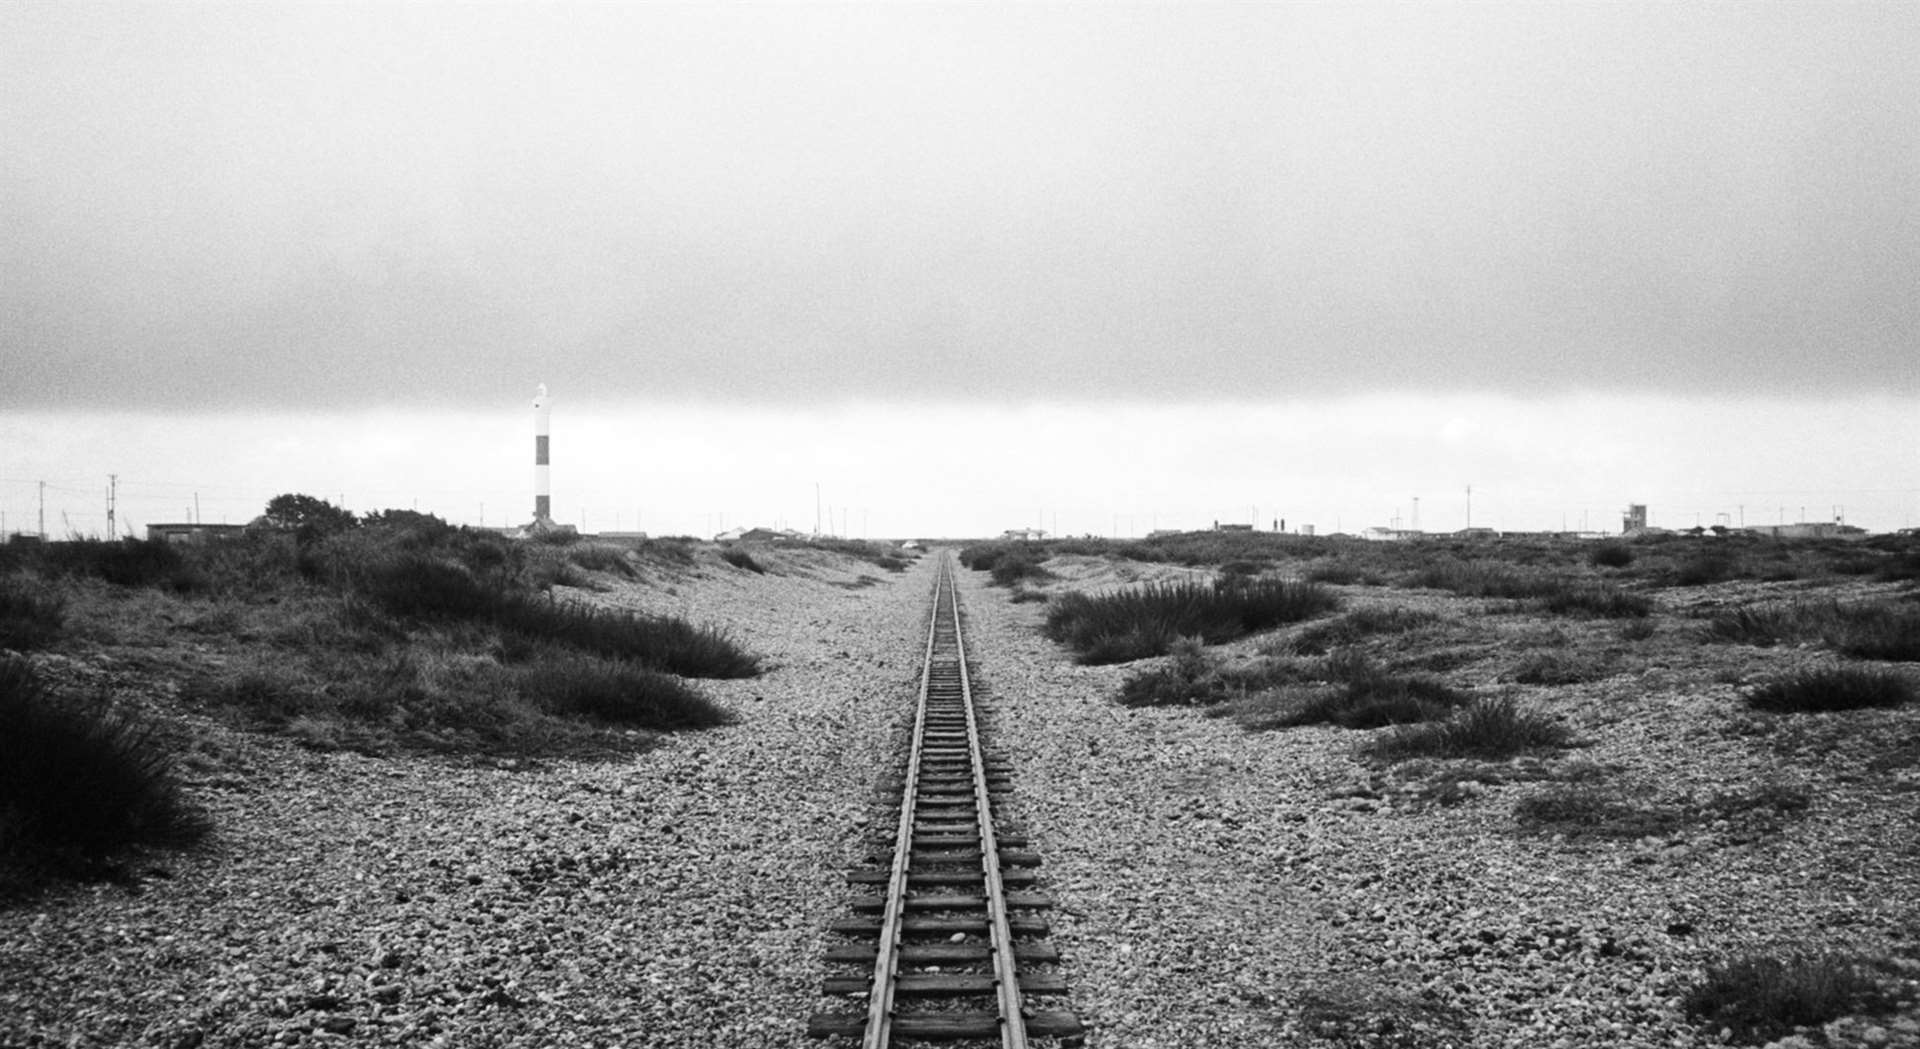 This photo of the Romney, Hythe and Dymchurch Railway line at Dungeness was released by Sheeran. Picture: Nic Minns